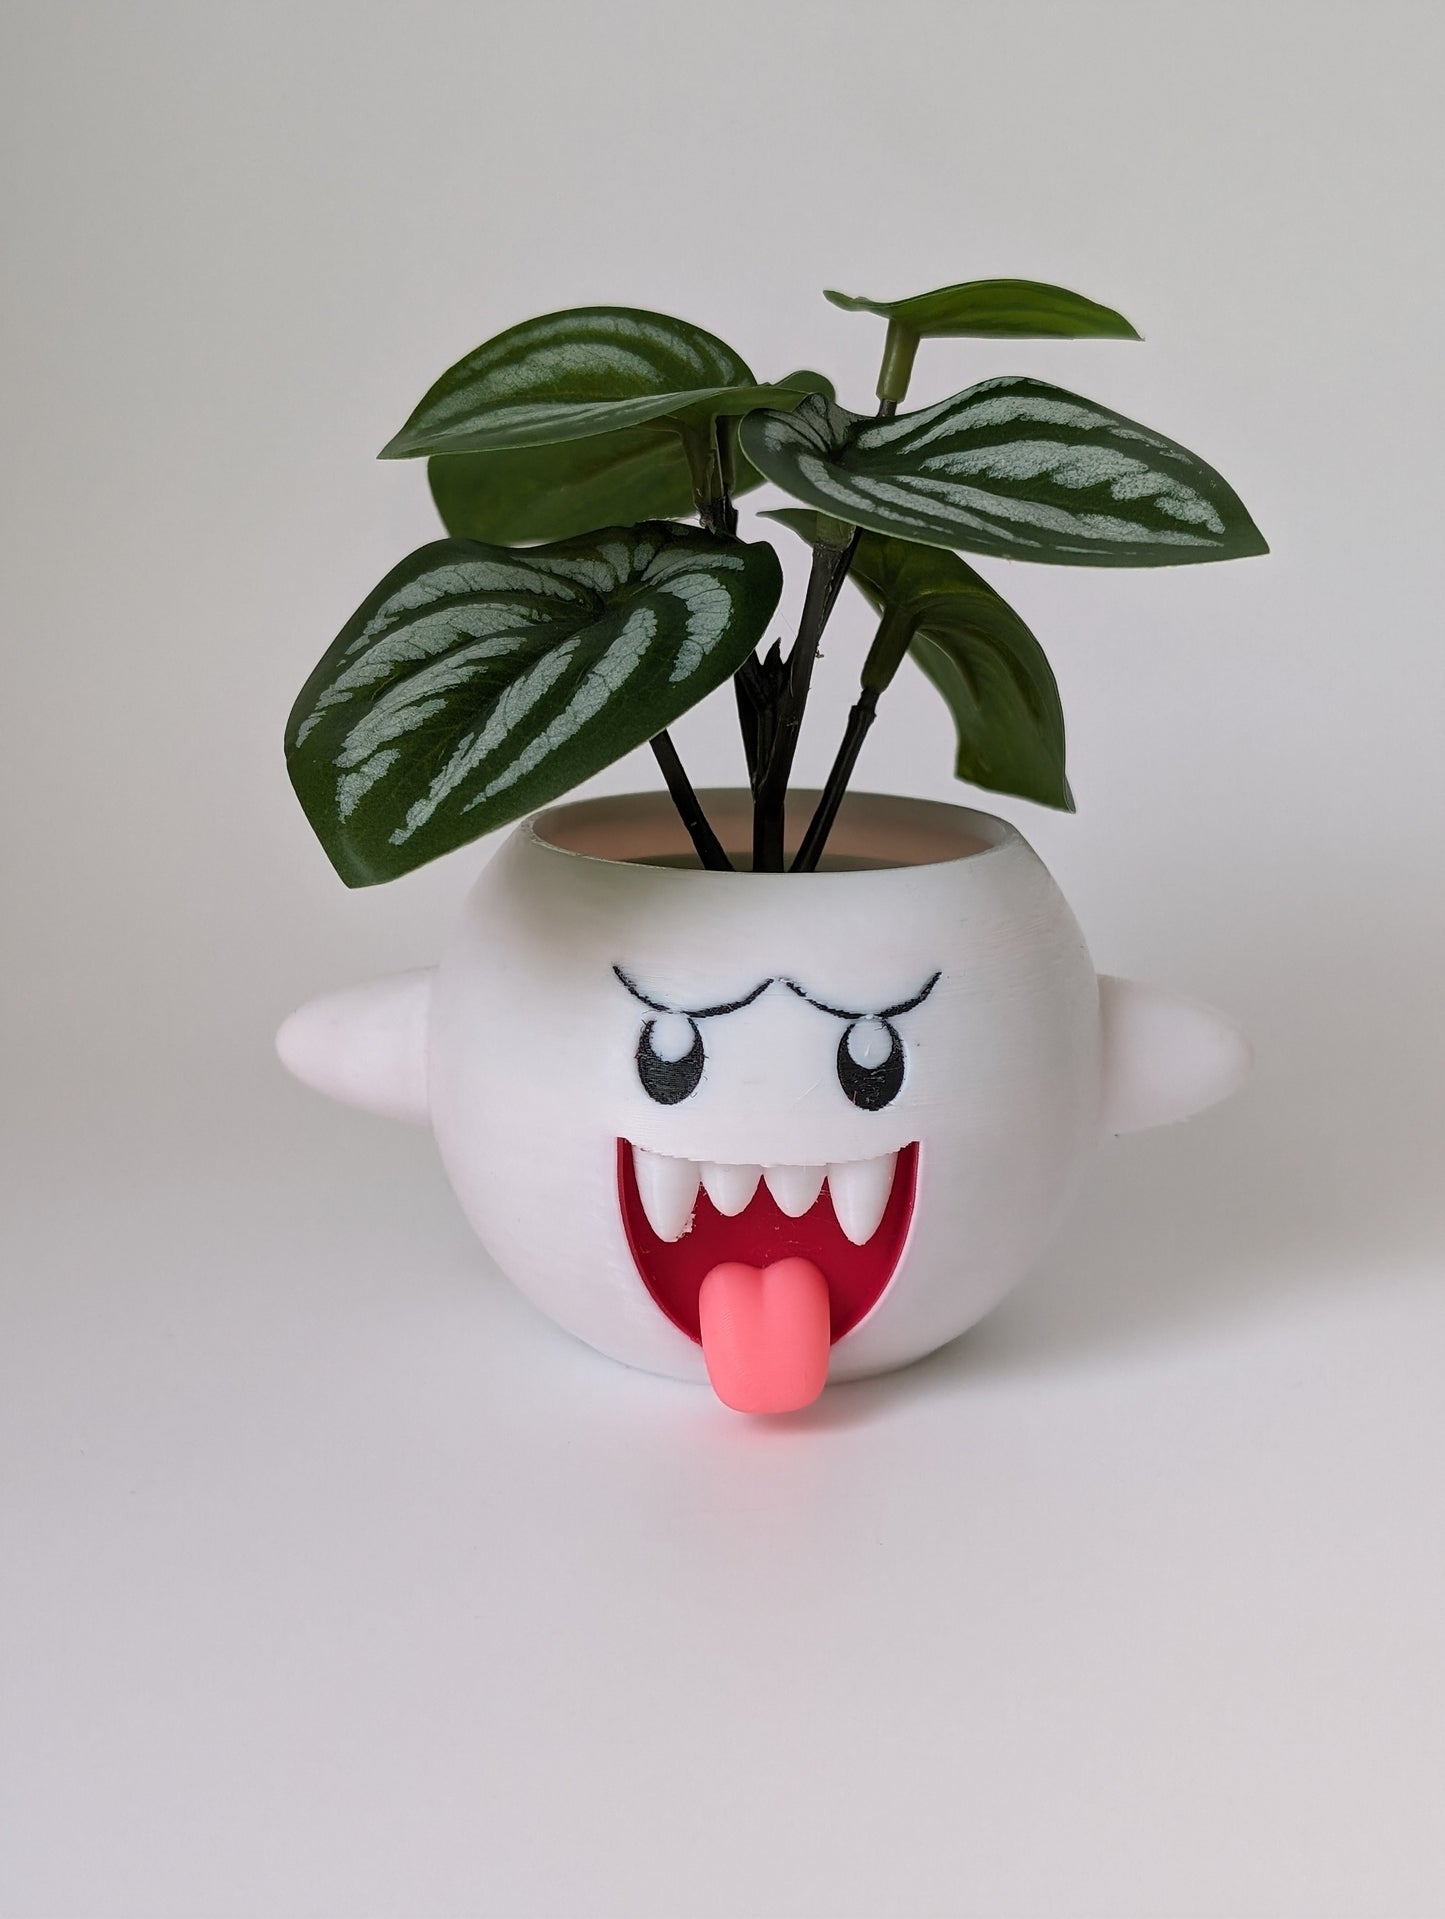 Small Mario Boo planter from the front close up